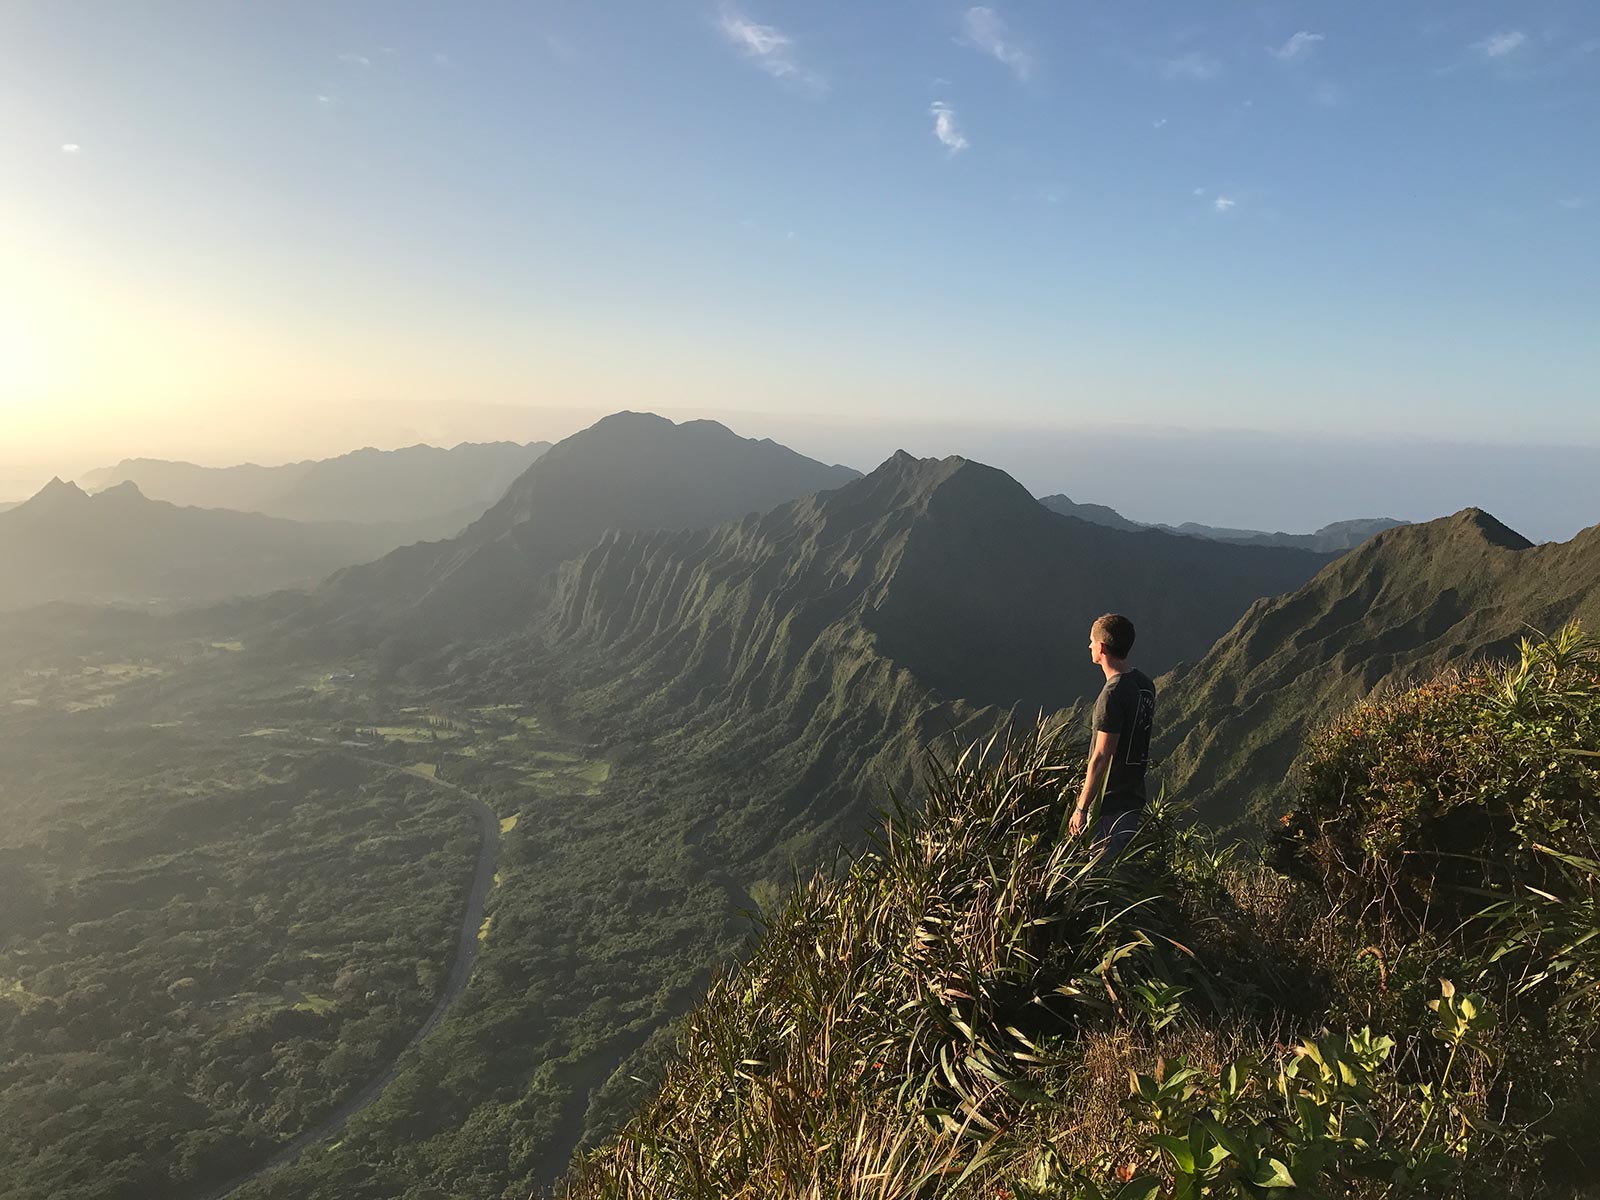 David Simpson enjoying the view from Stairway to Heaven in Oahu, Hawaii. Climbing the stairway to heaven, Hawaii & full guide